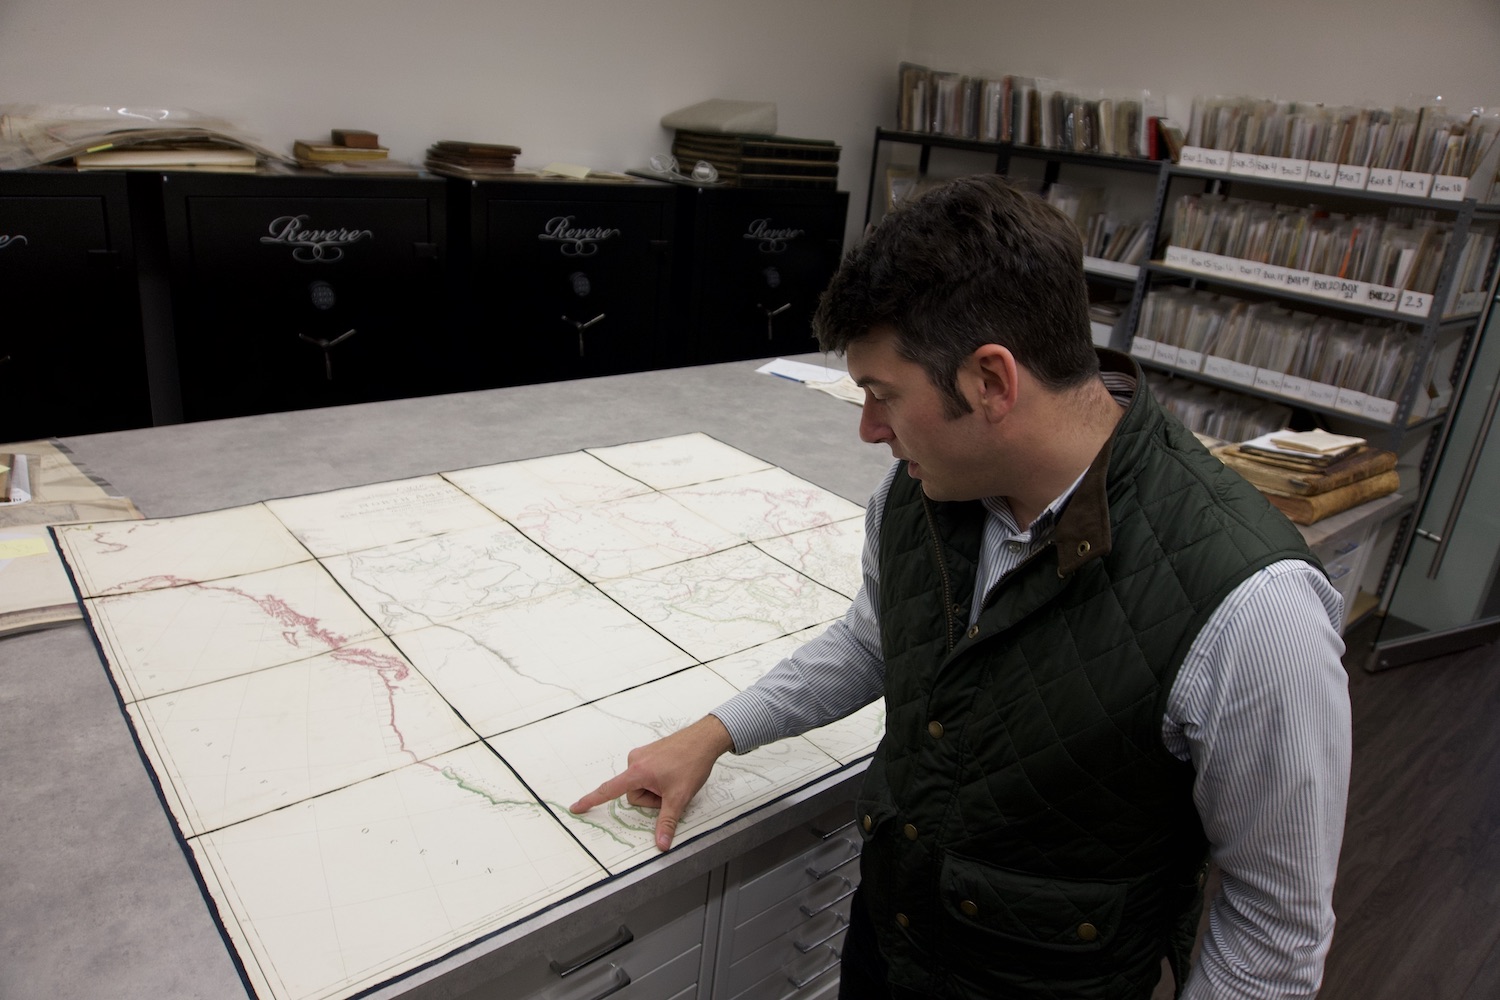 Alex Clausen showing a historic map inside Barry Lawrence Ruderman Antique Maps collection in La Jolla, San Diego